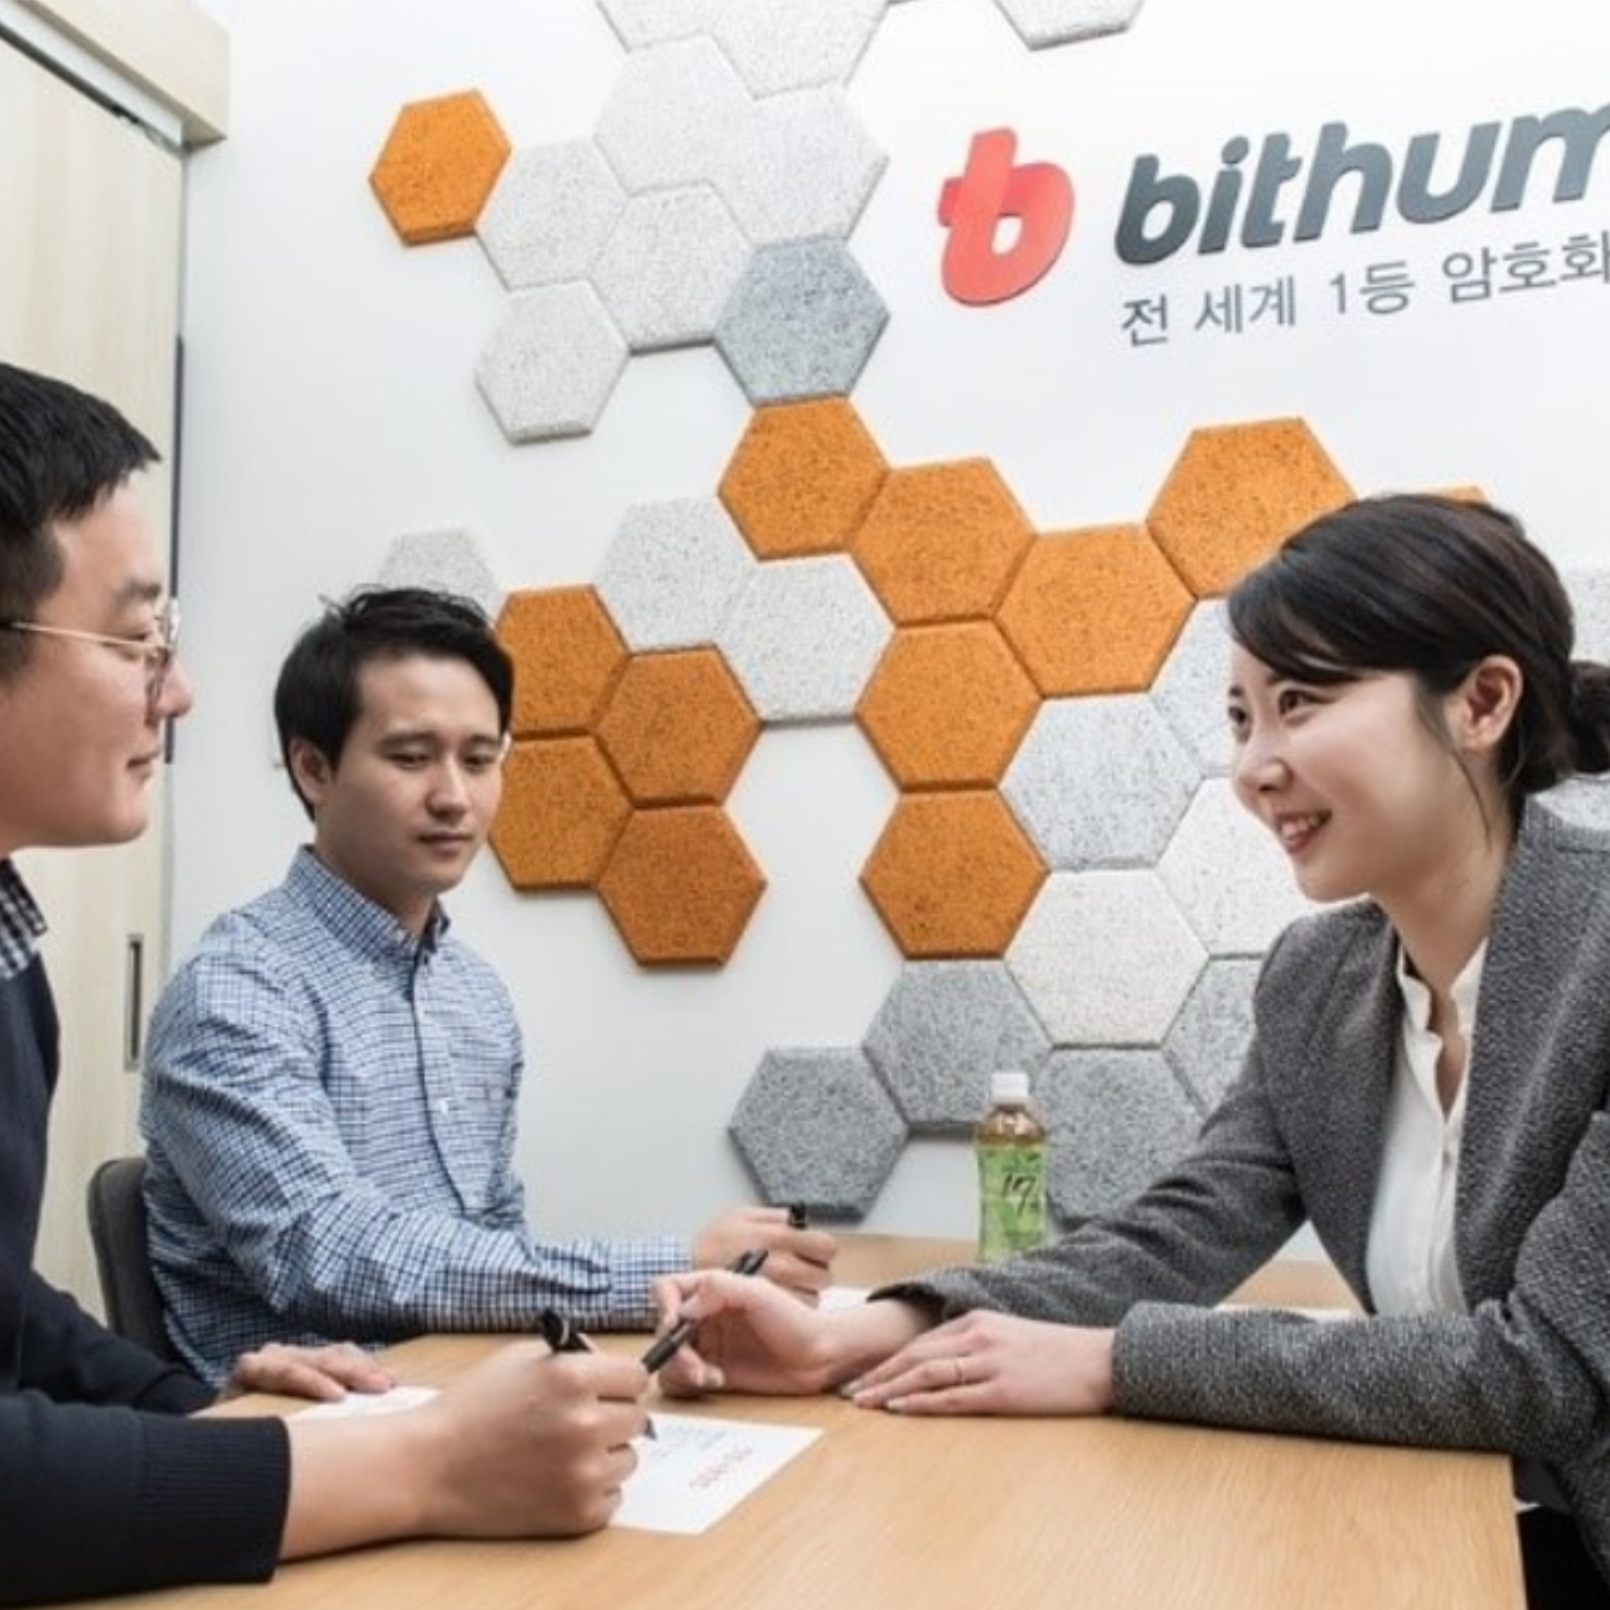 Bithumb Launching New Service to Allow Crypto Payments at 6000+ Physical Stores